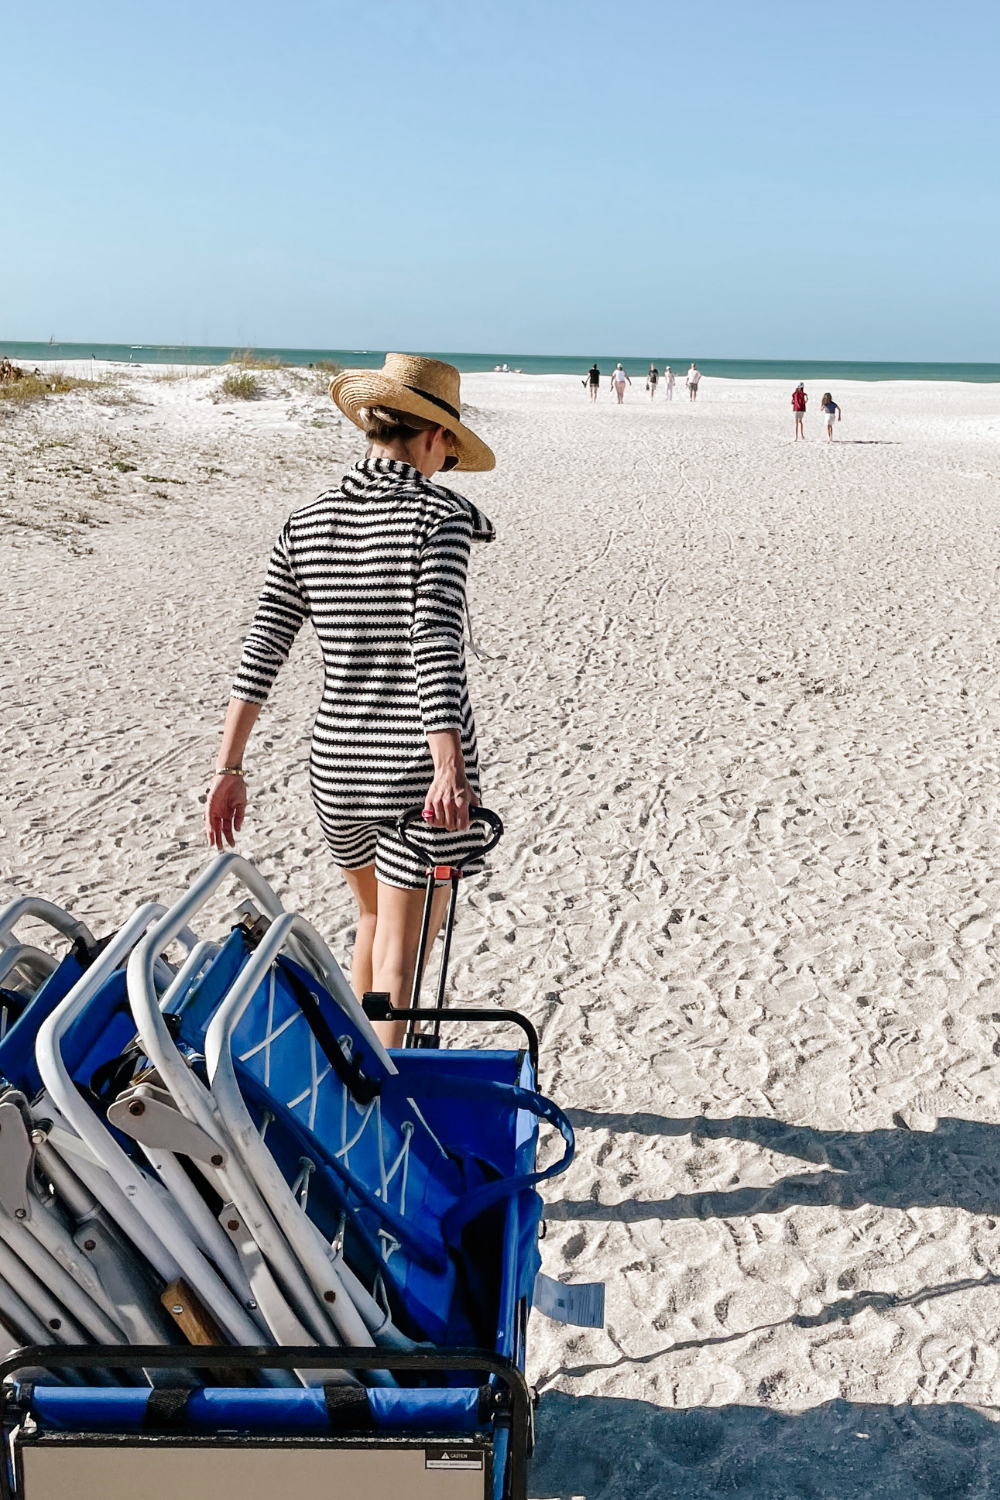 Suzanne pulling a wagon on the beach in a striped cover up. 